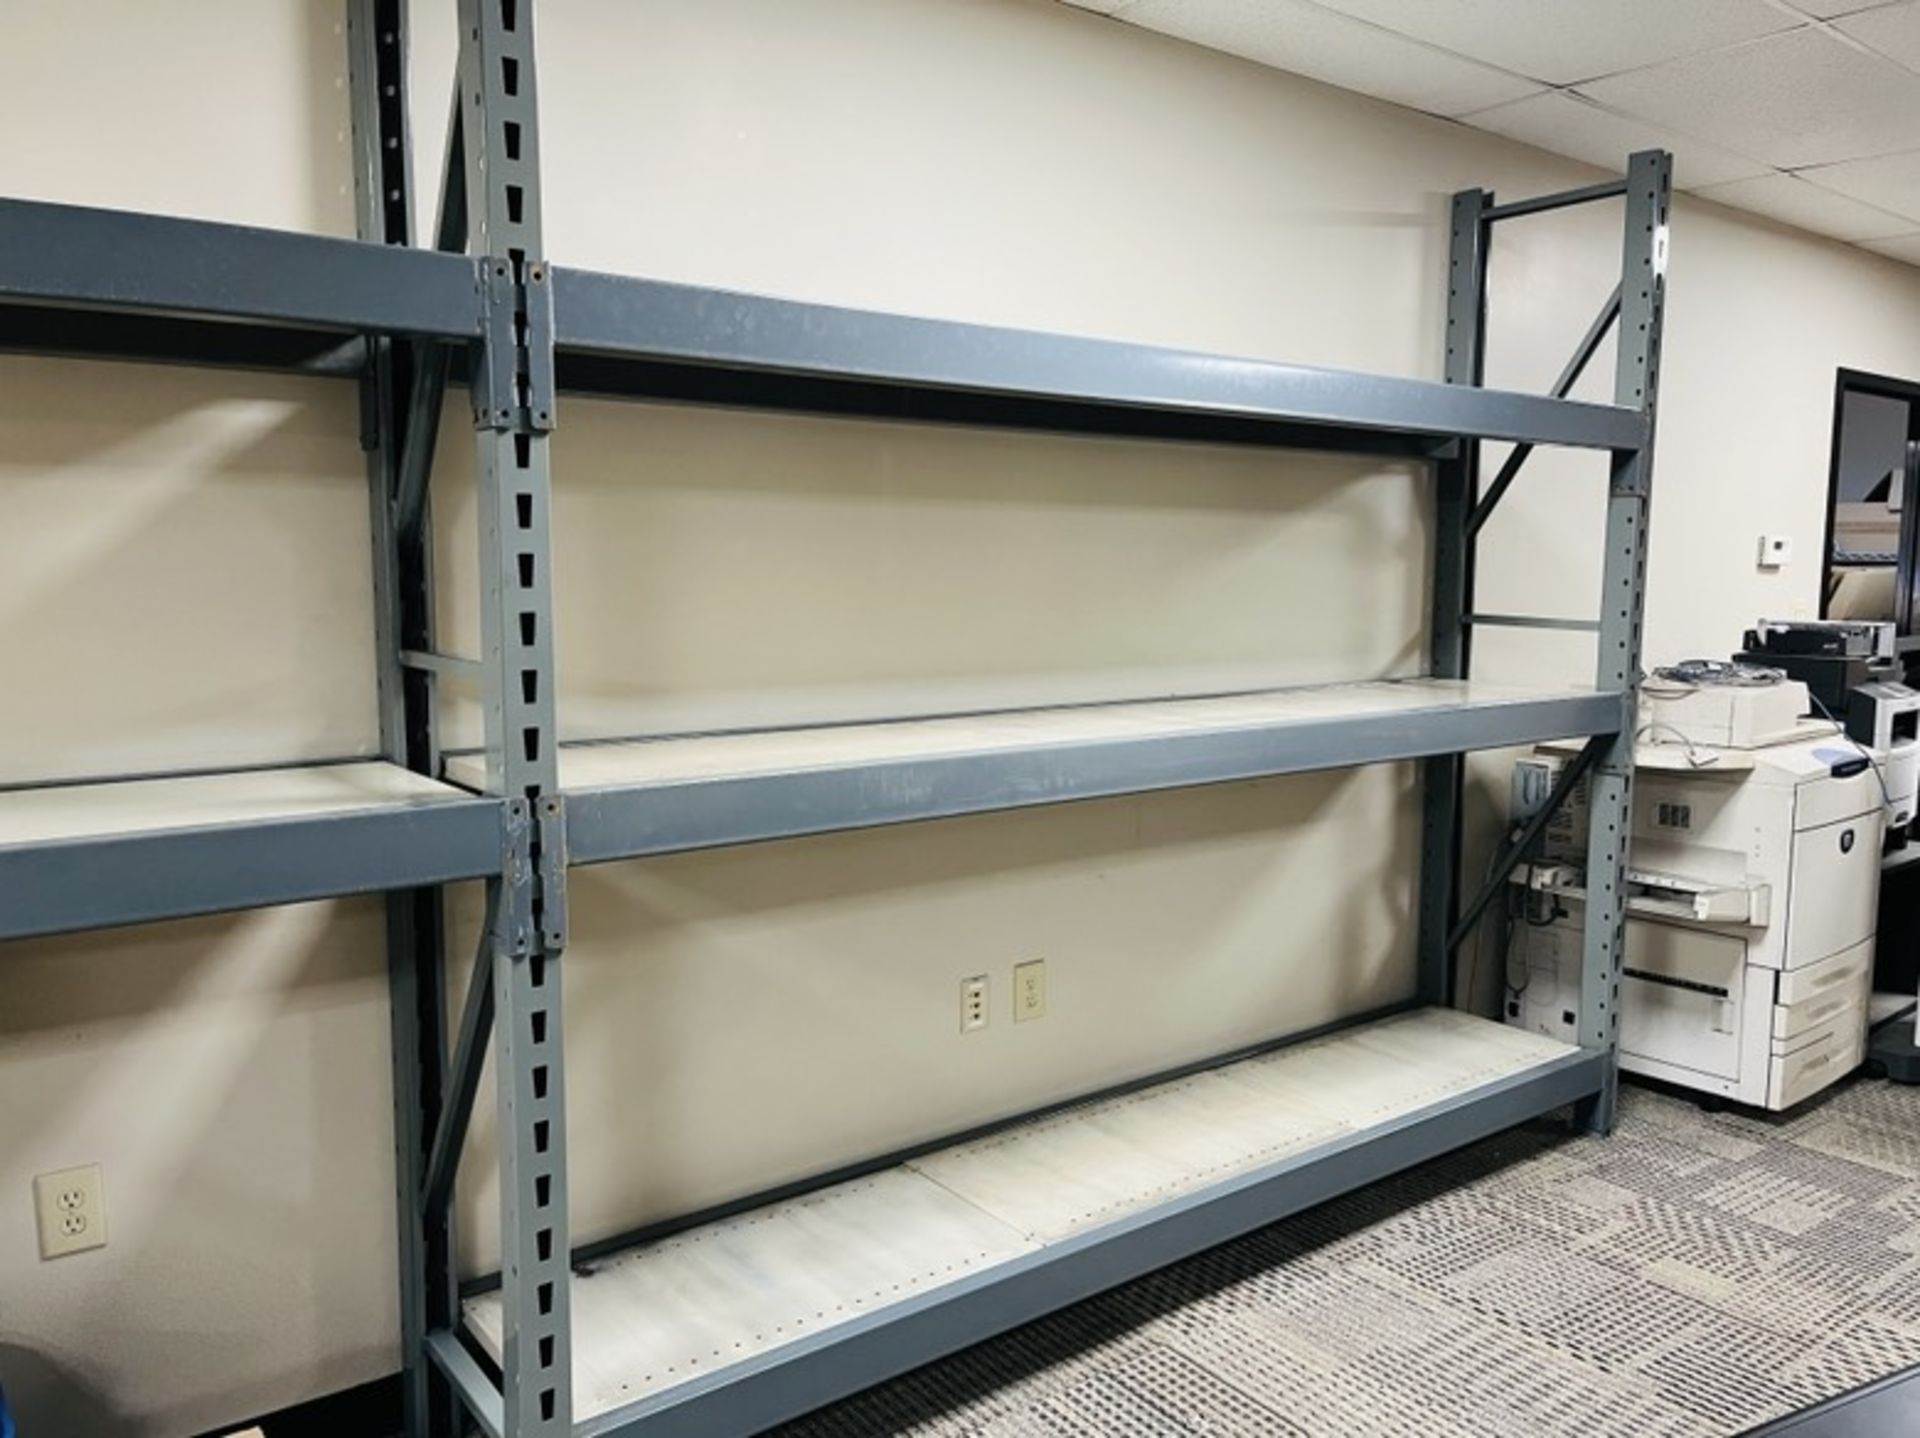 5 SECTION OF RETAIL/MERCHANDISE PALLET RACK SHELVING 8'H X 21.5"D X 108"L WITH 3 SHELVES - Image 3 of 4